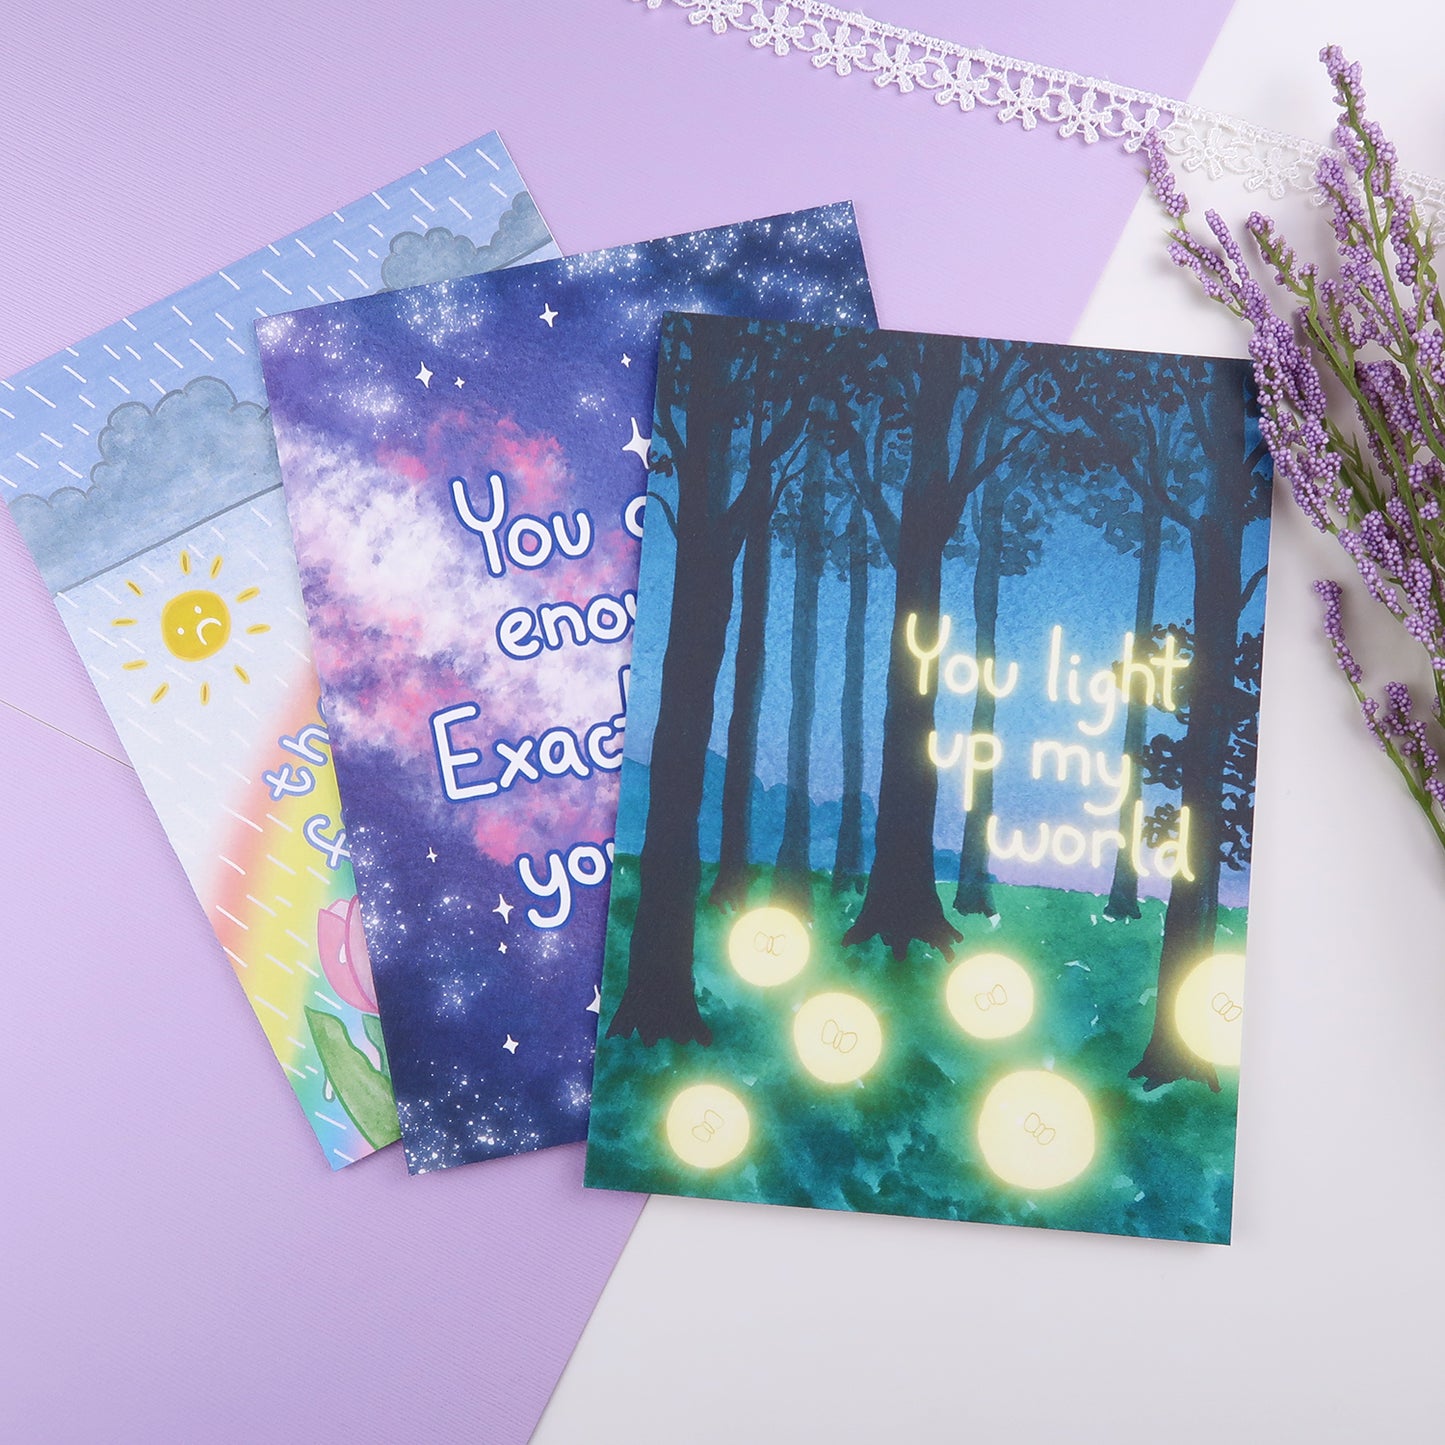 You Light up my World - Greeting Card